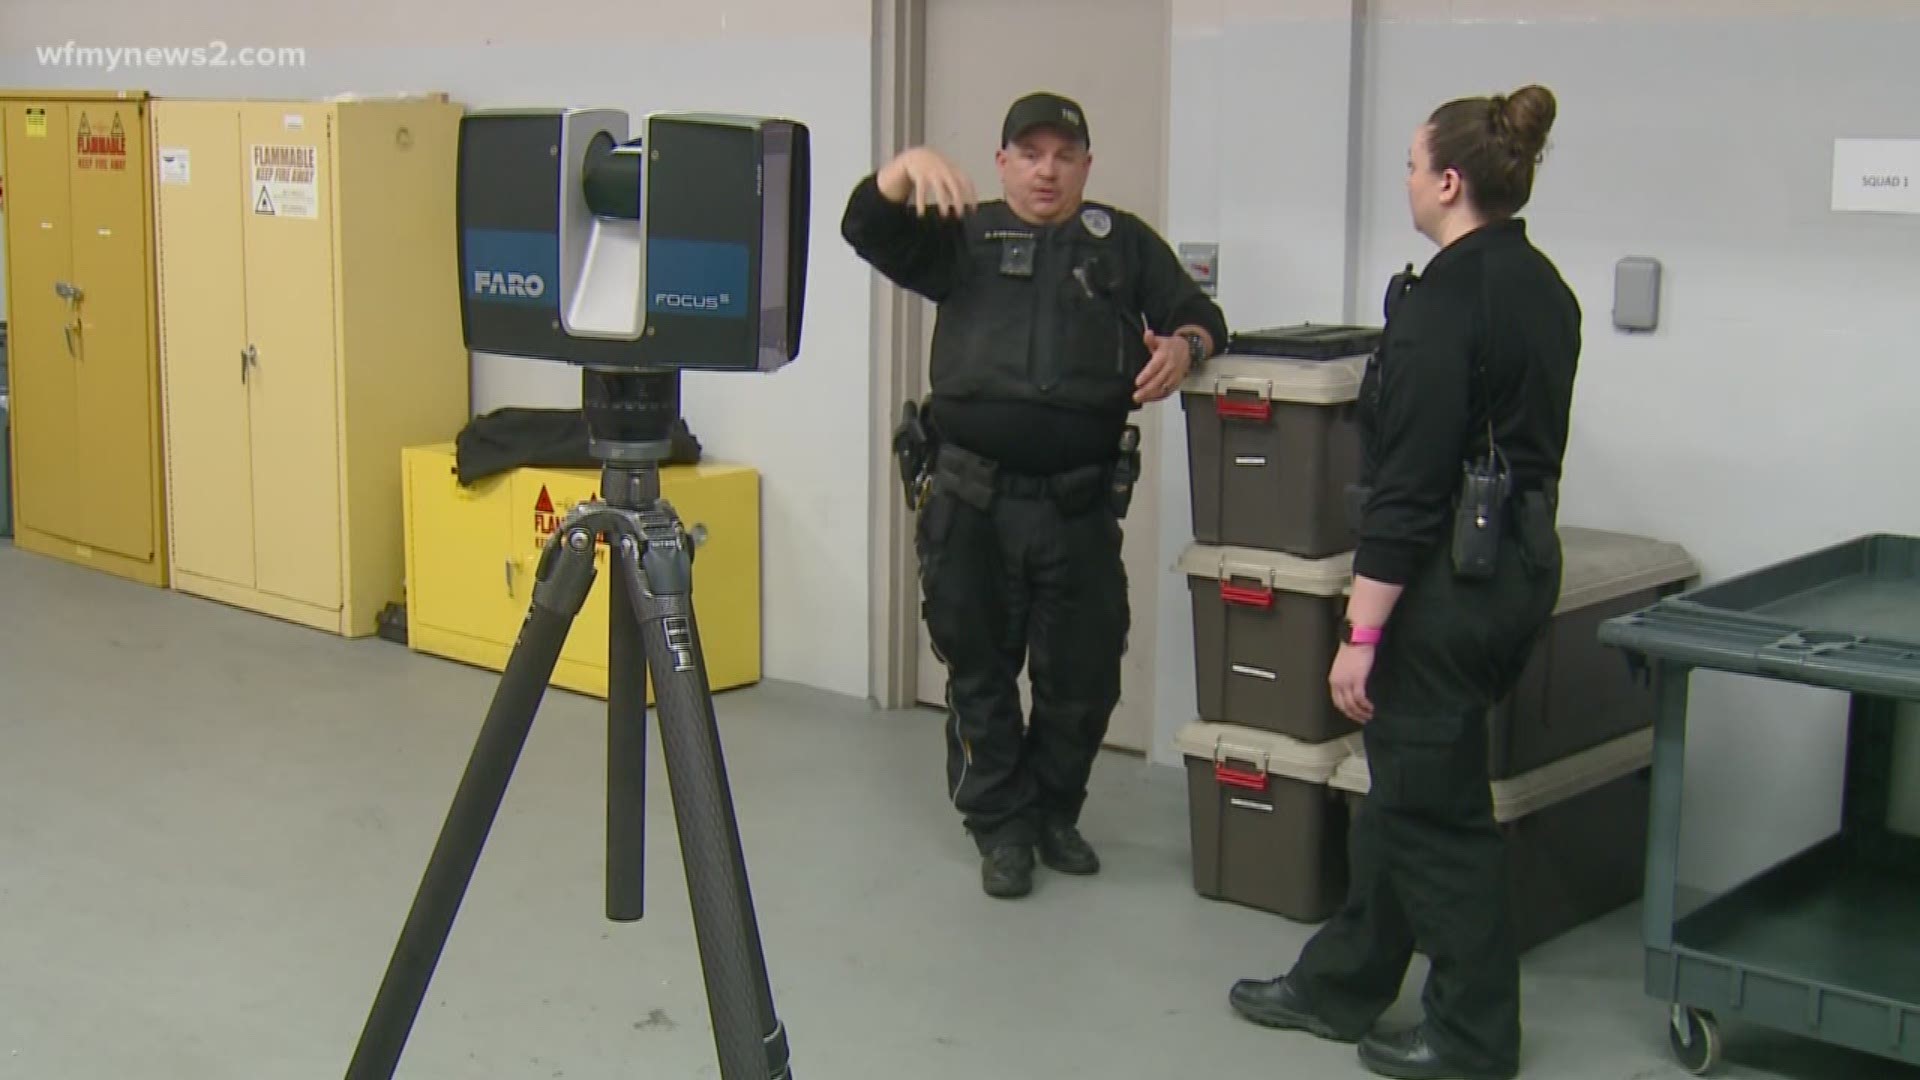 The scanners can take an entire crime scene and place it onto computers for officers to look at in real time